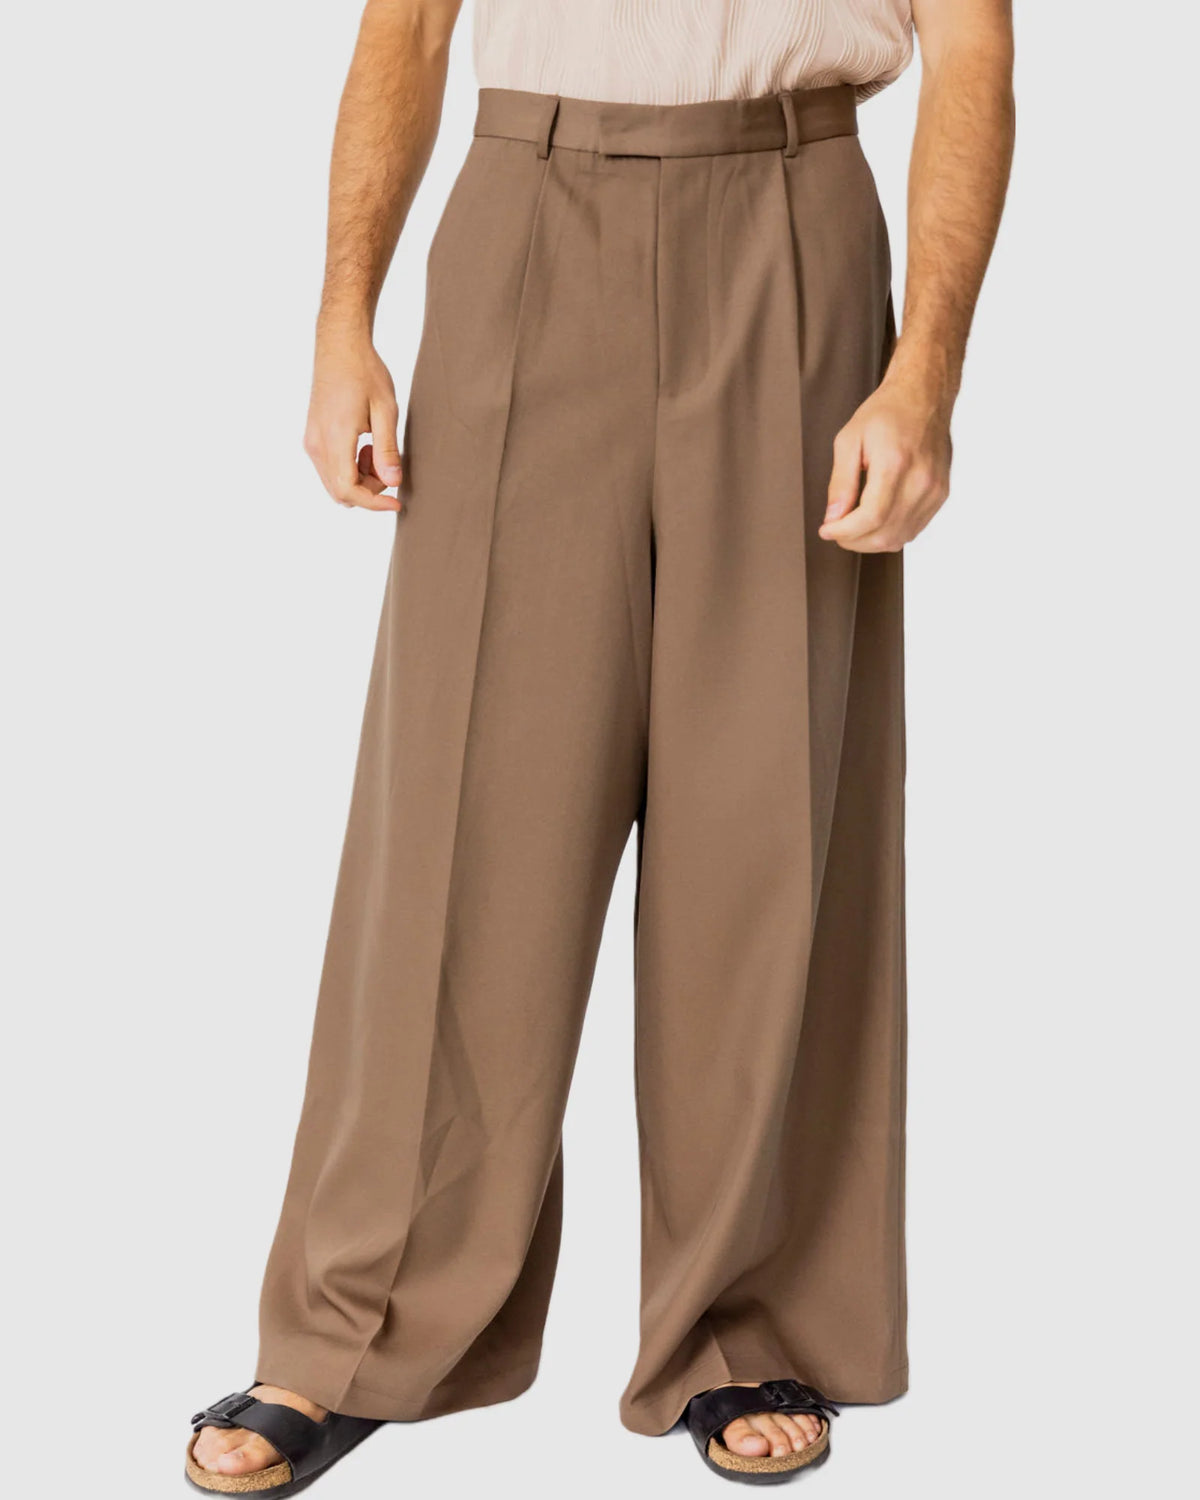 Justin Cassin Adrian Wide Leg Trousers in Brown Color